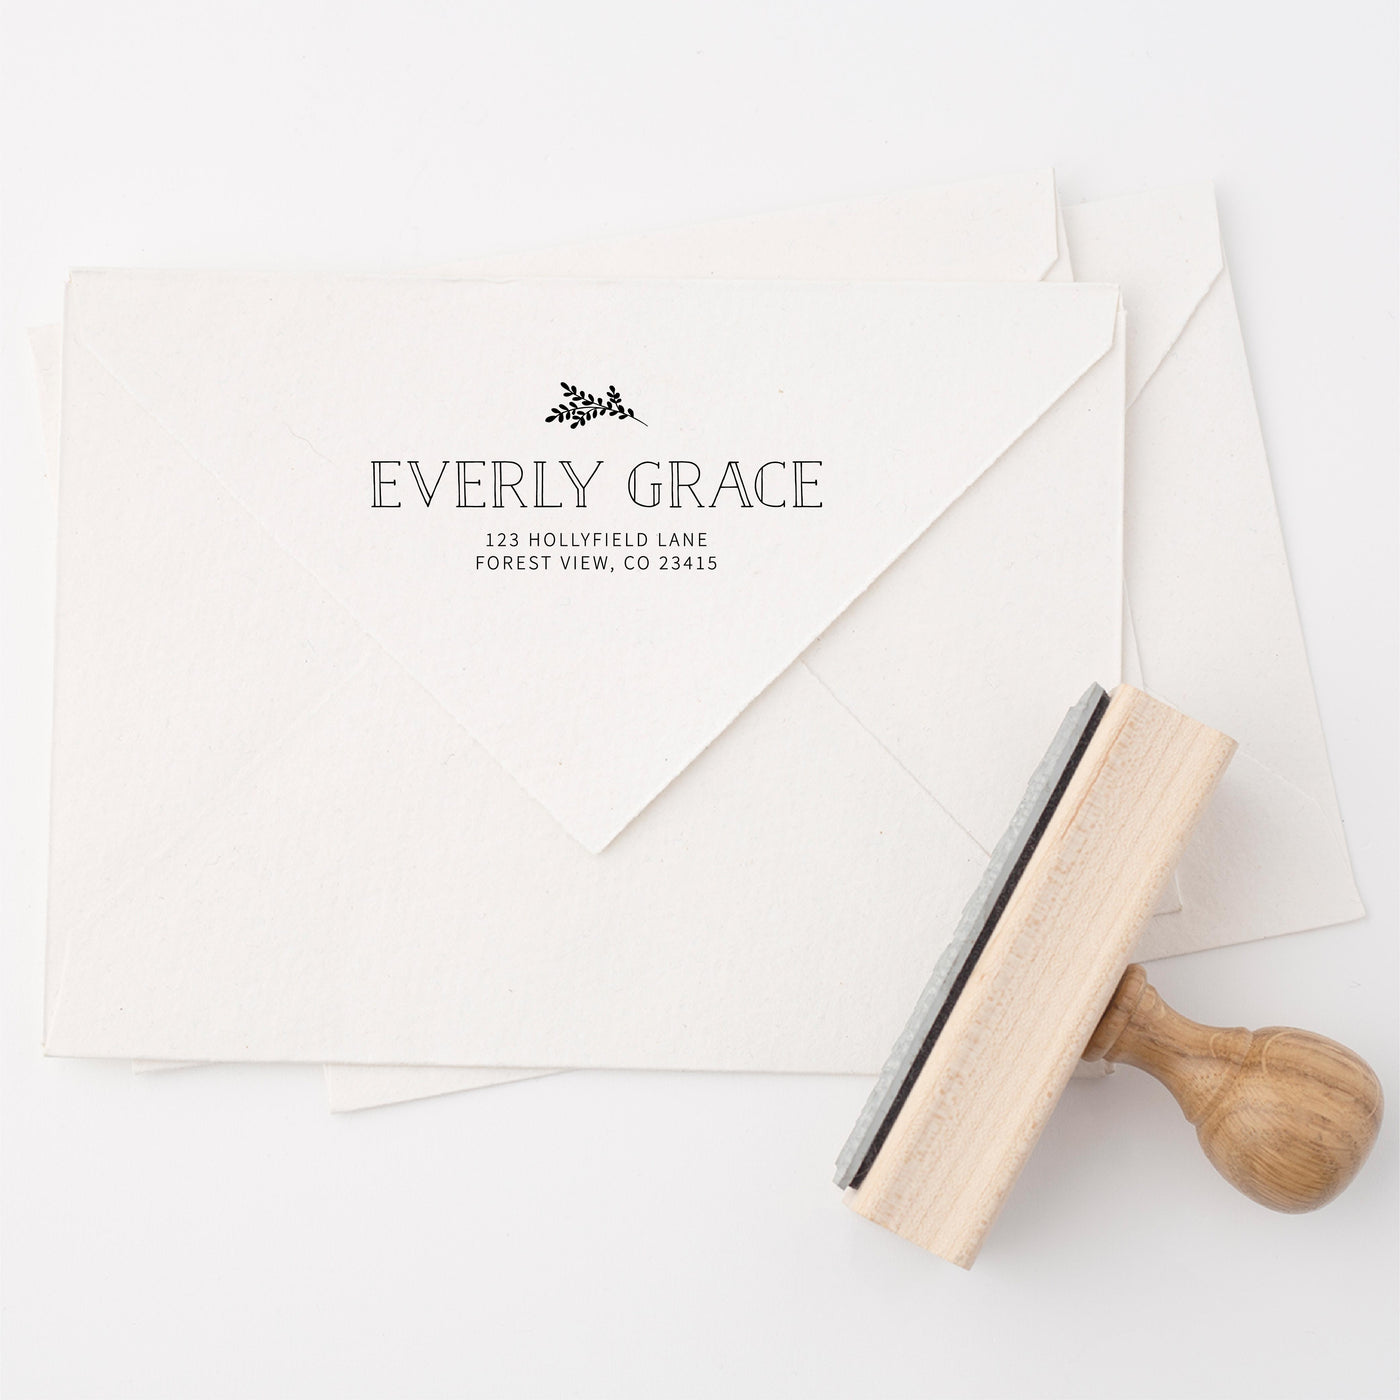 Everly Classic Botanical Return Address | Personalised Rubber Stamp with Wooden Handle for Fine Art Wedding Stationery Invitation Envelope | Heirloom Seals